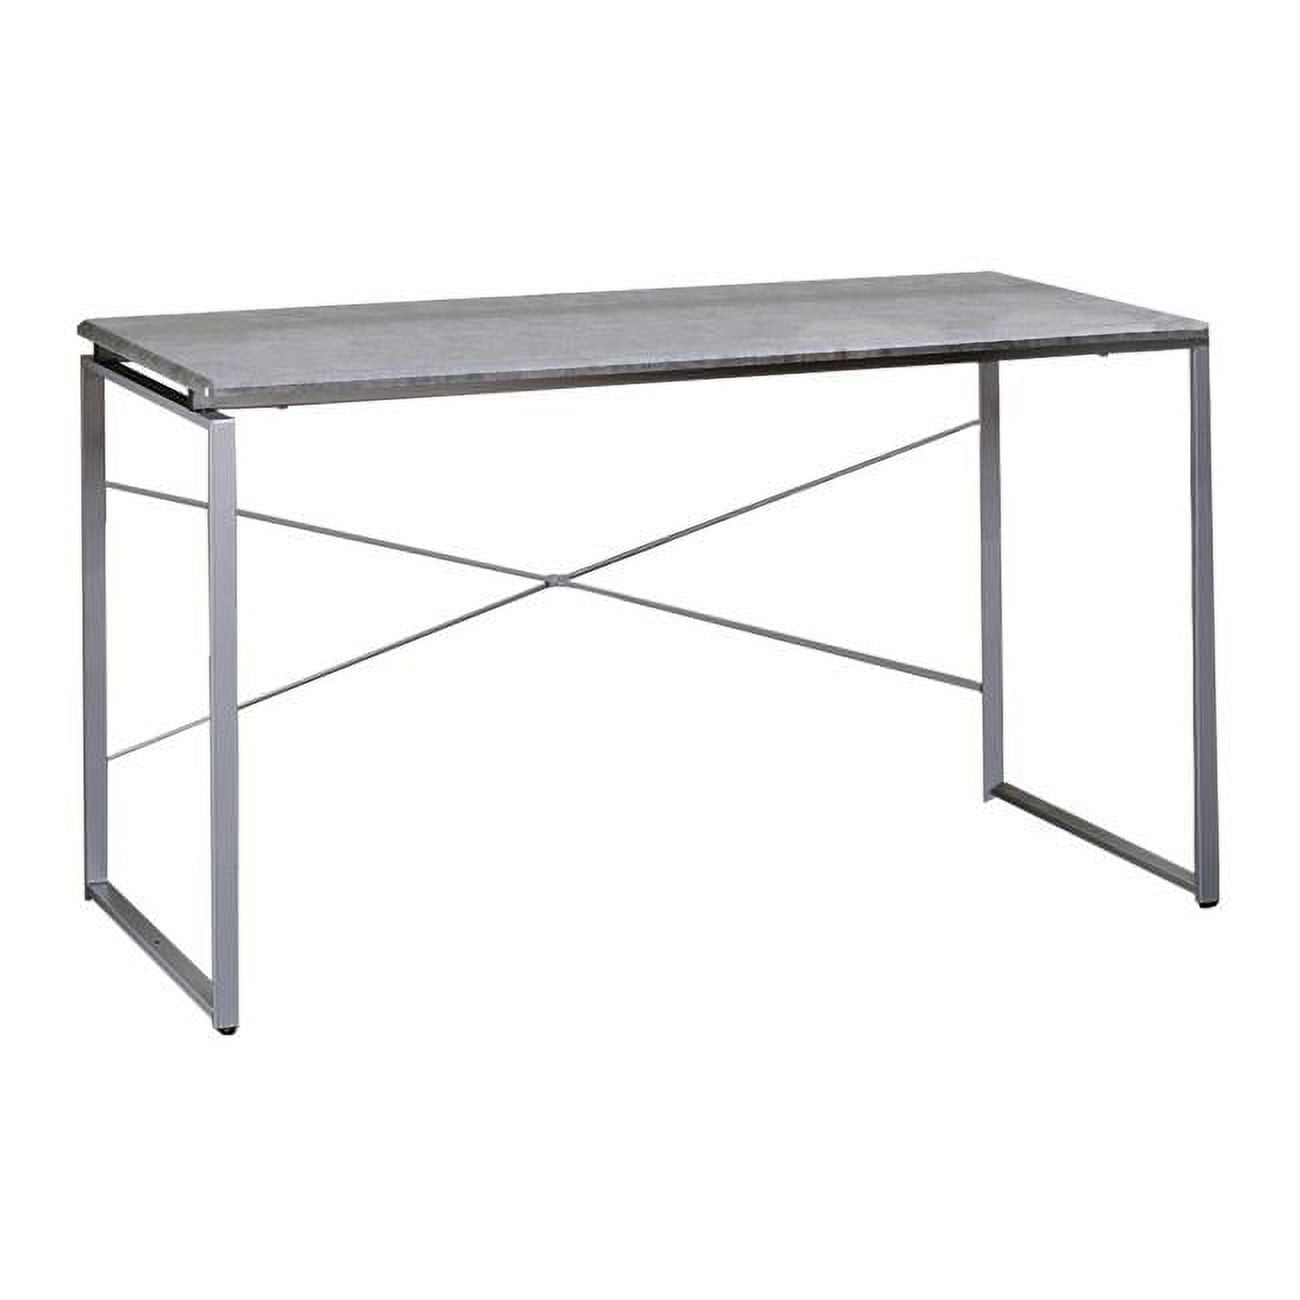 Bm209625 Sled Base Rectangular Table With X Shape Back & Wood Top - Gray & Silver - 28 X 22 X 47 In.